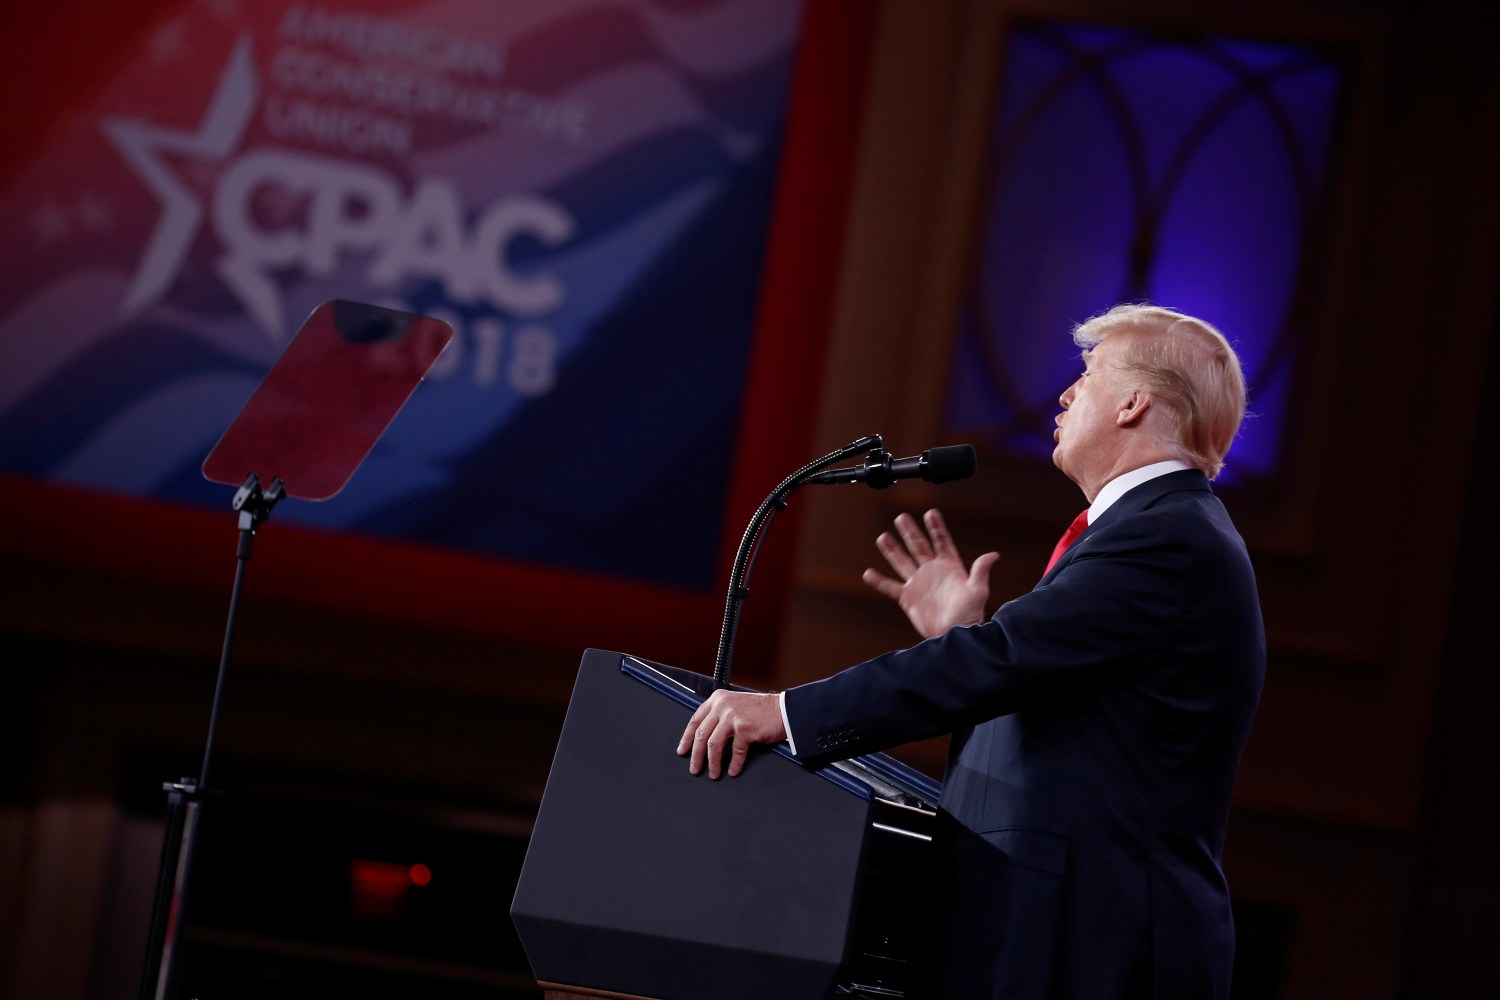 U.S. President Donald Trump speaks at the Conservative Political Action Conference (CPAC) at National Harbor, Maryland, U.S., February 23, 2018. REUTERS/Joshua Roberts - RC1E6A6C15C0